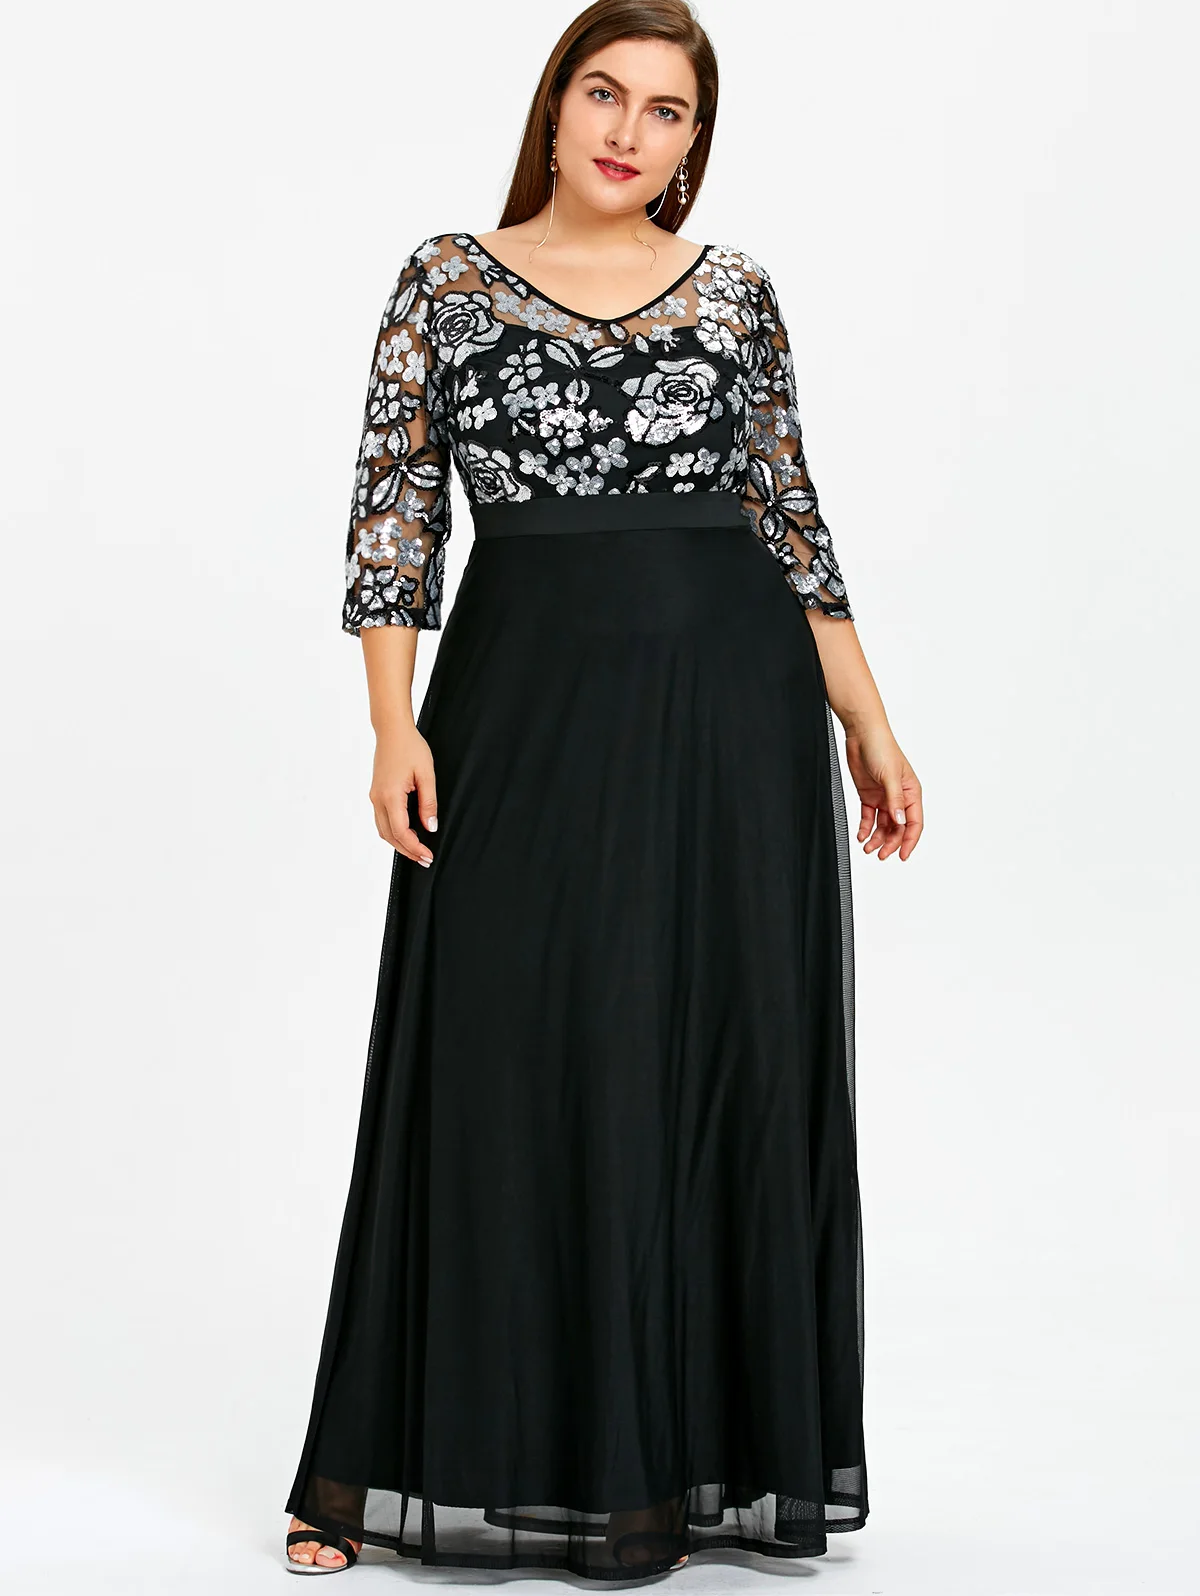 Maxi Party Dresses for Women: A Perfect Outfit for Any Occasion ...